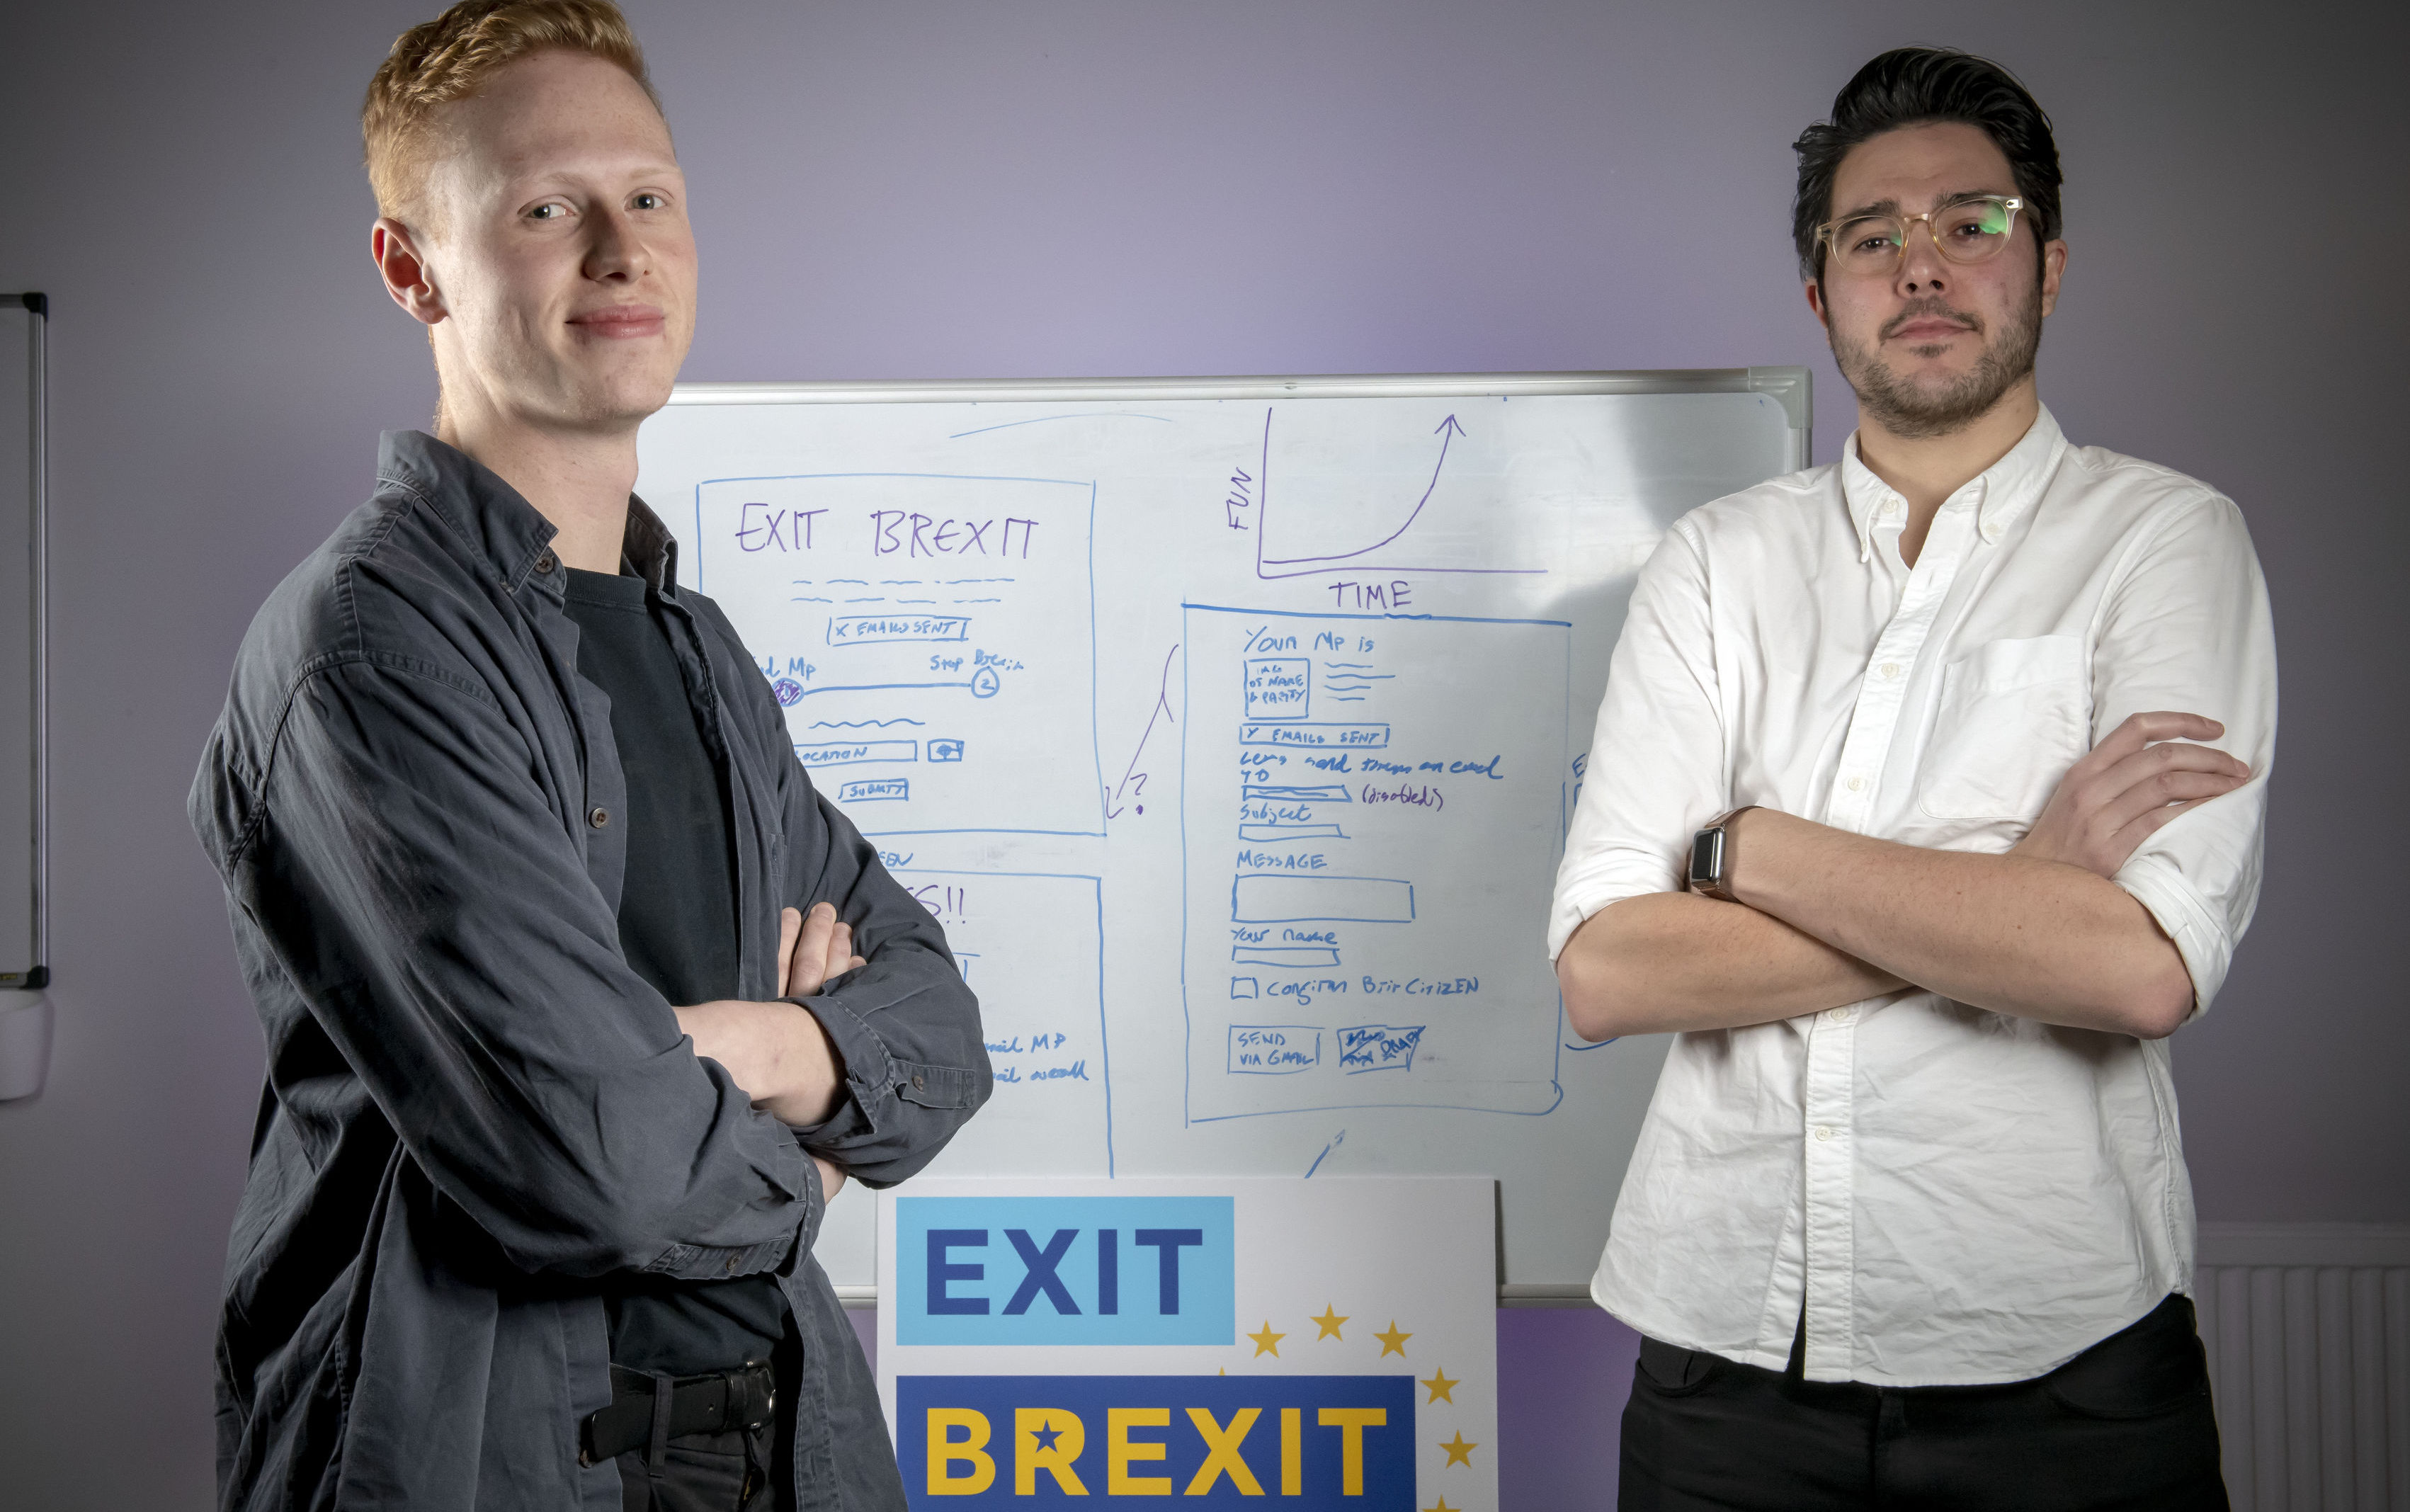 Product manager Richard Phillips-Kerr (left) and founder Grant MacLennan, from Glasgow-based digital product studio, Neu who have created Exit Brexit (Paul Chappells / PA Wire)